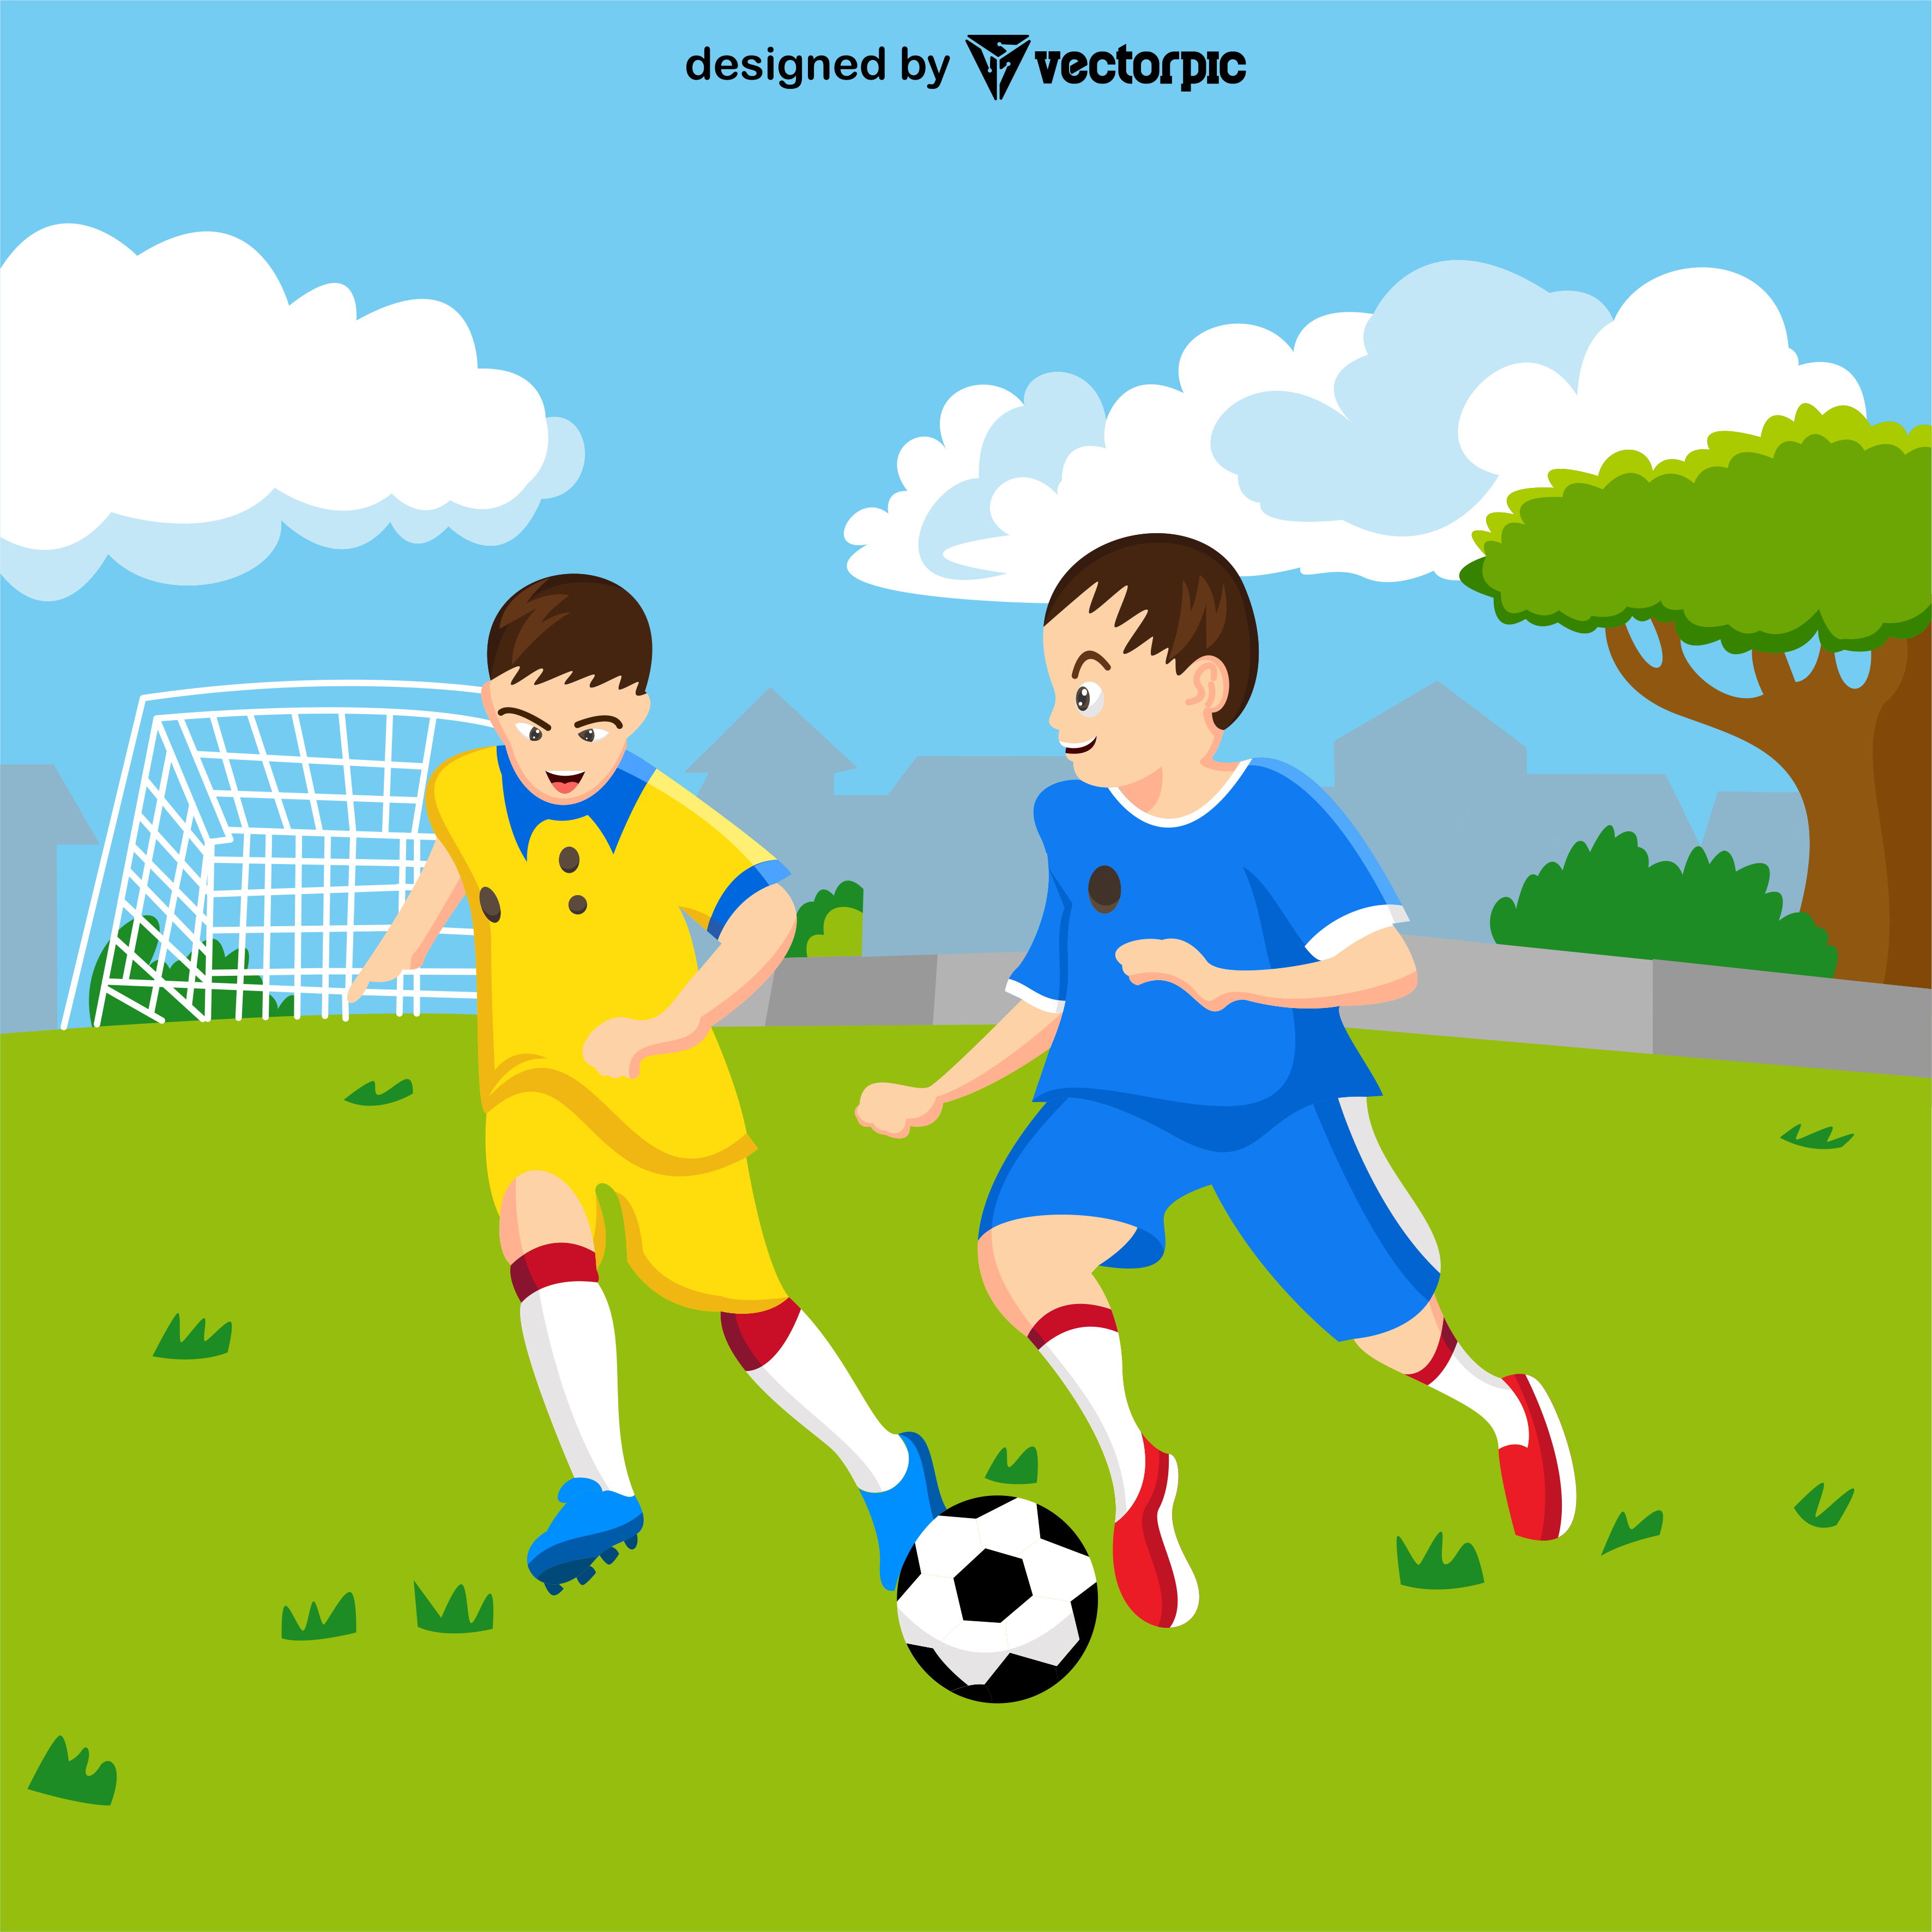 two boys playing football cartoon design free vector | VECTORPIC